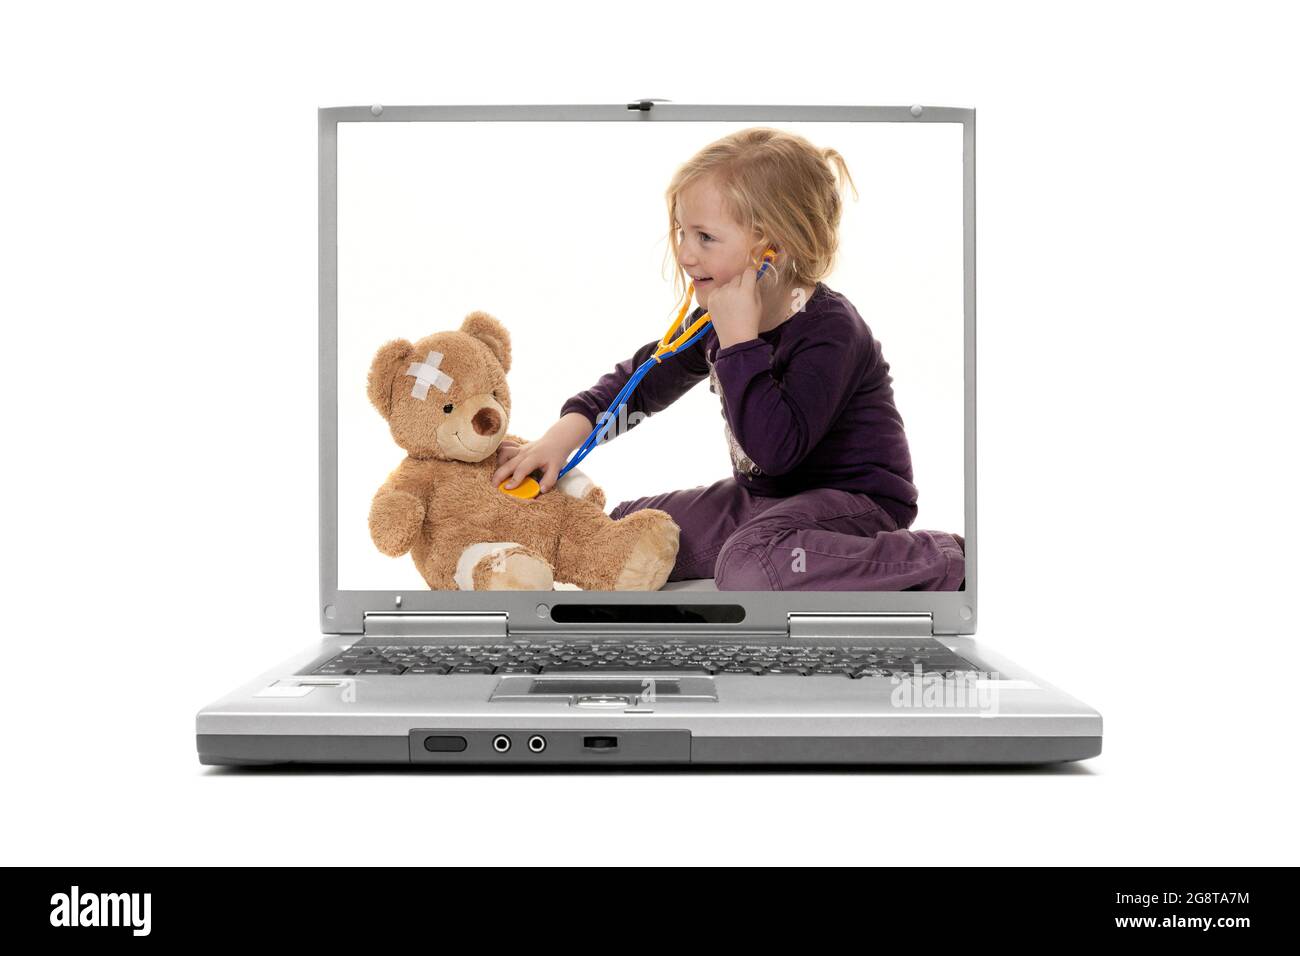 image 'Child playing with teddy' on the display of a laptop computer Stock Photo